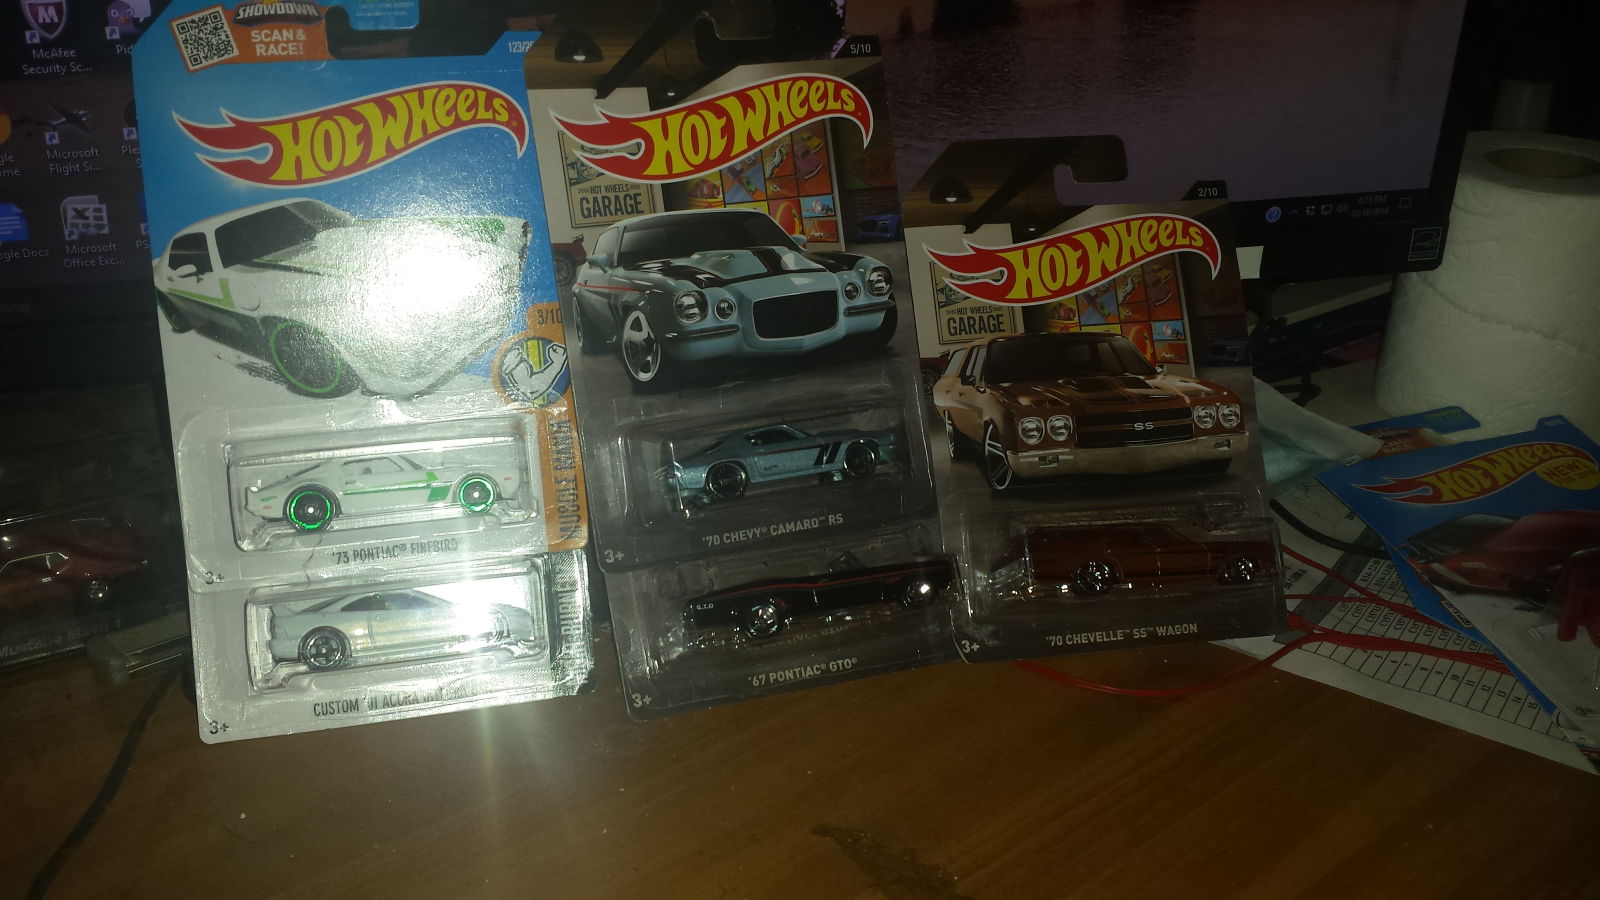 Got some more of the Garage Series and a early second gen Trans Am, plus that Integra is nice.